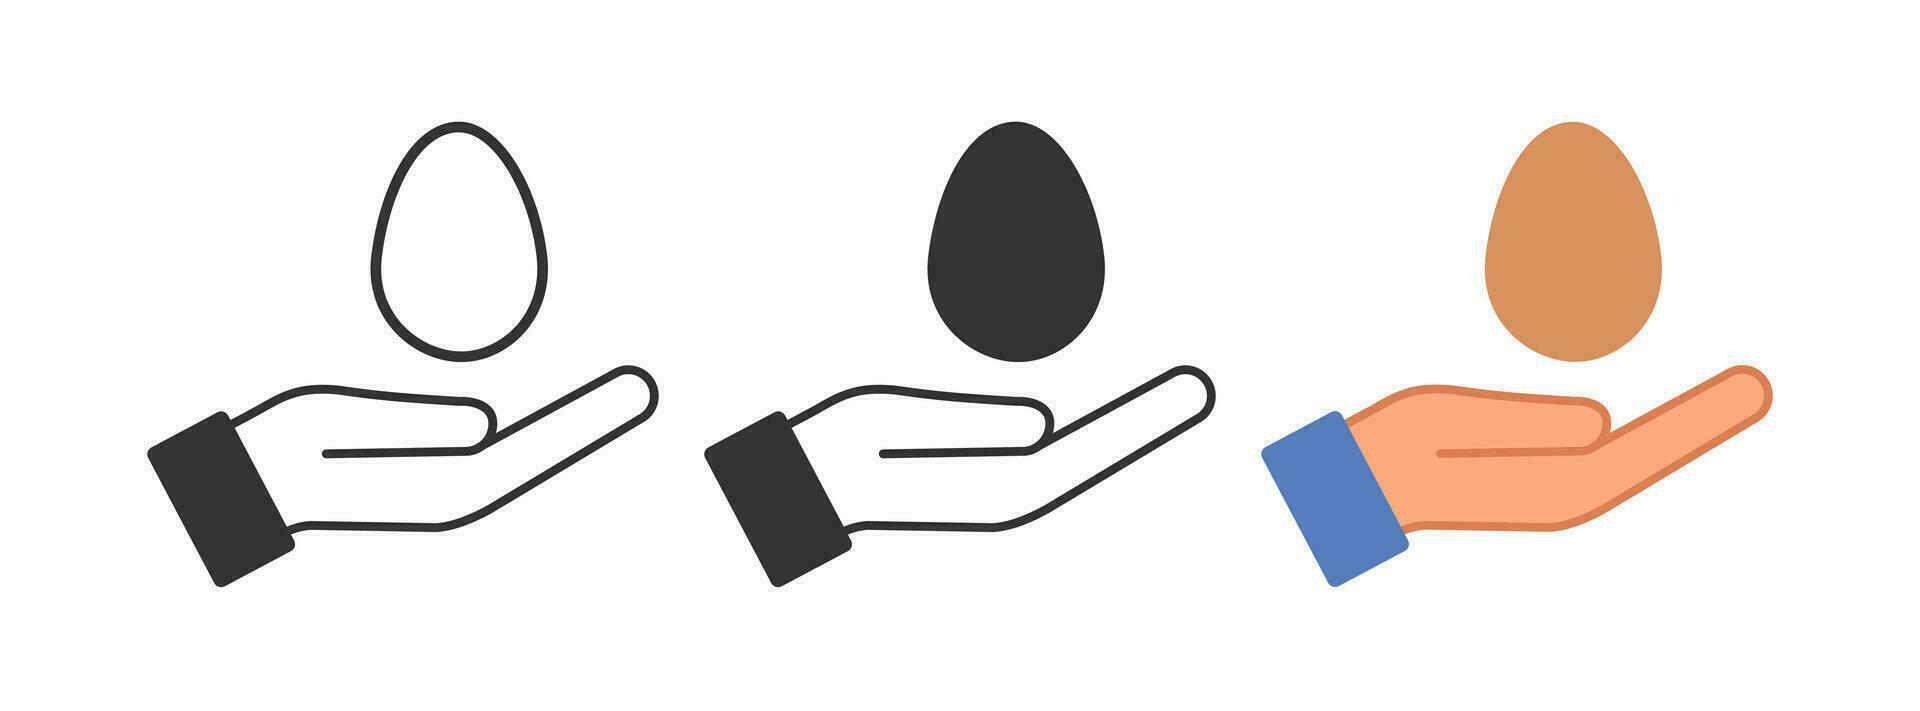 Egg in an open hand icon. Give a chicken embryo symbol. Sign keep oval vector. vector